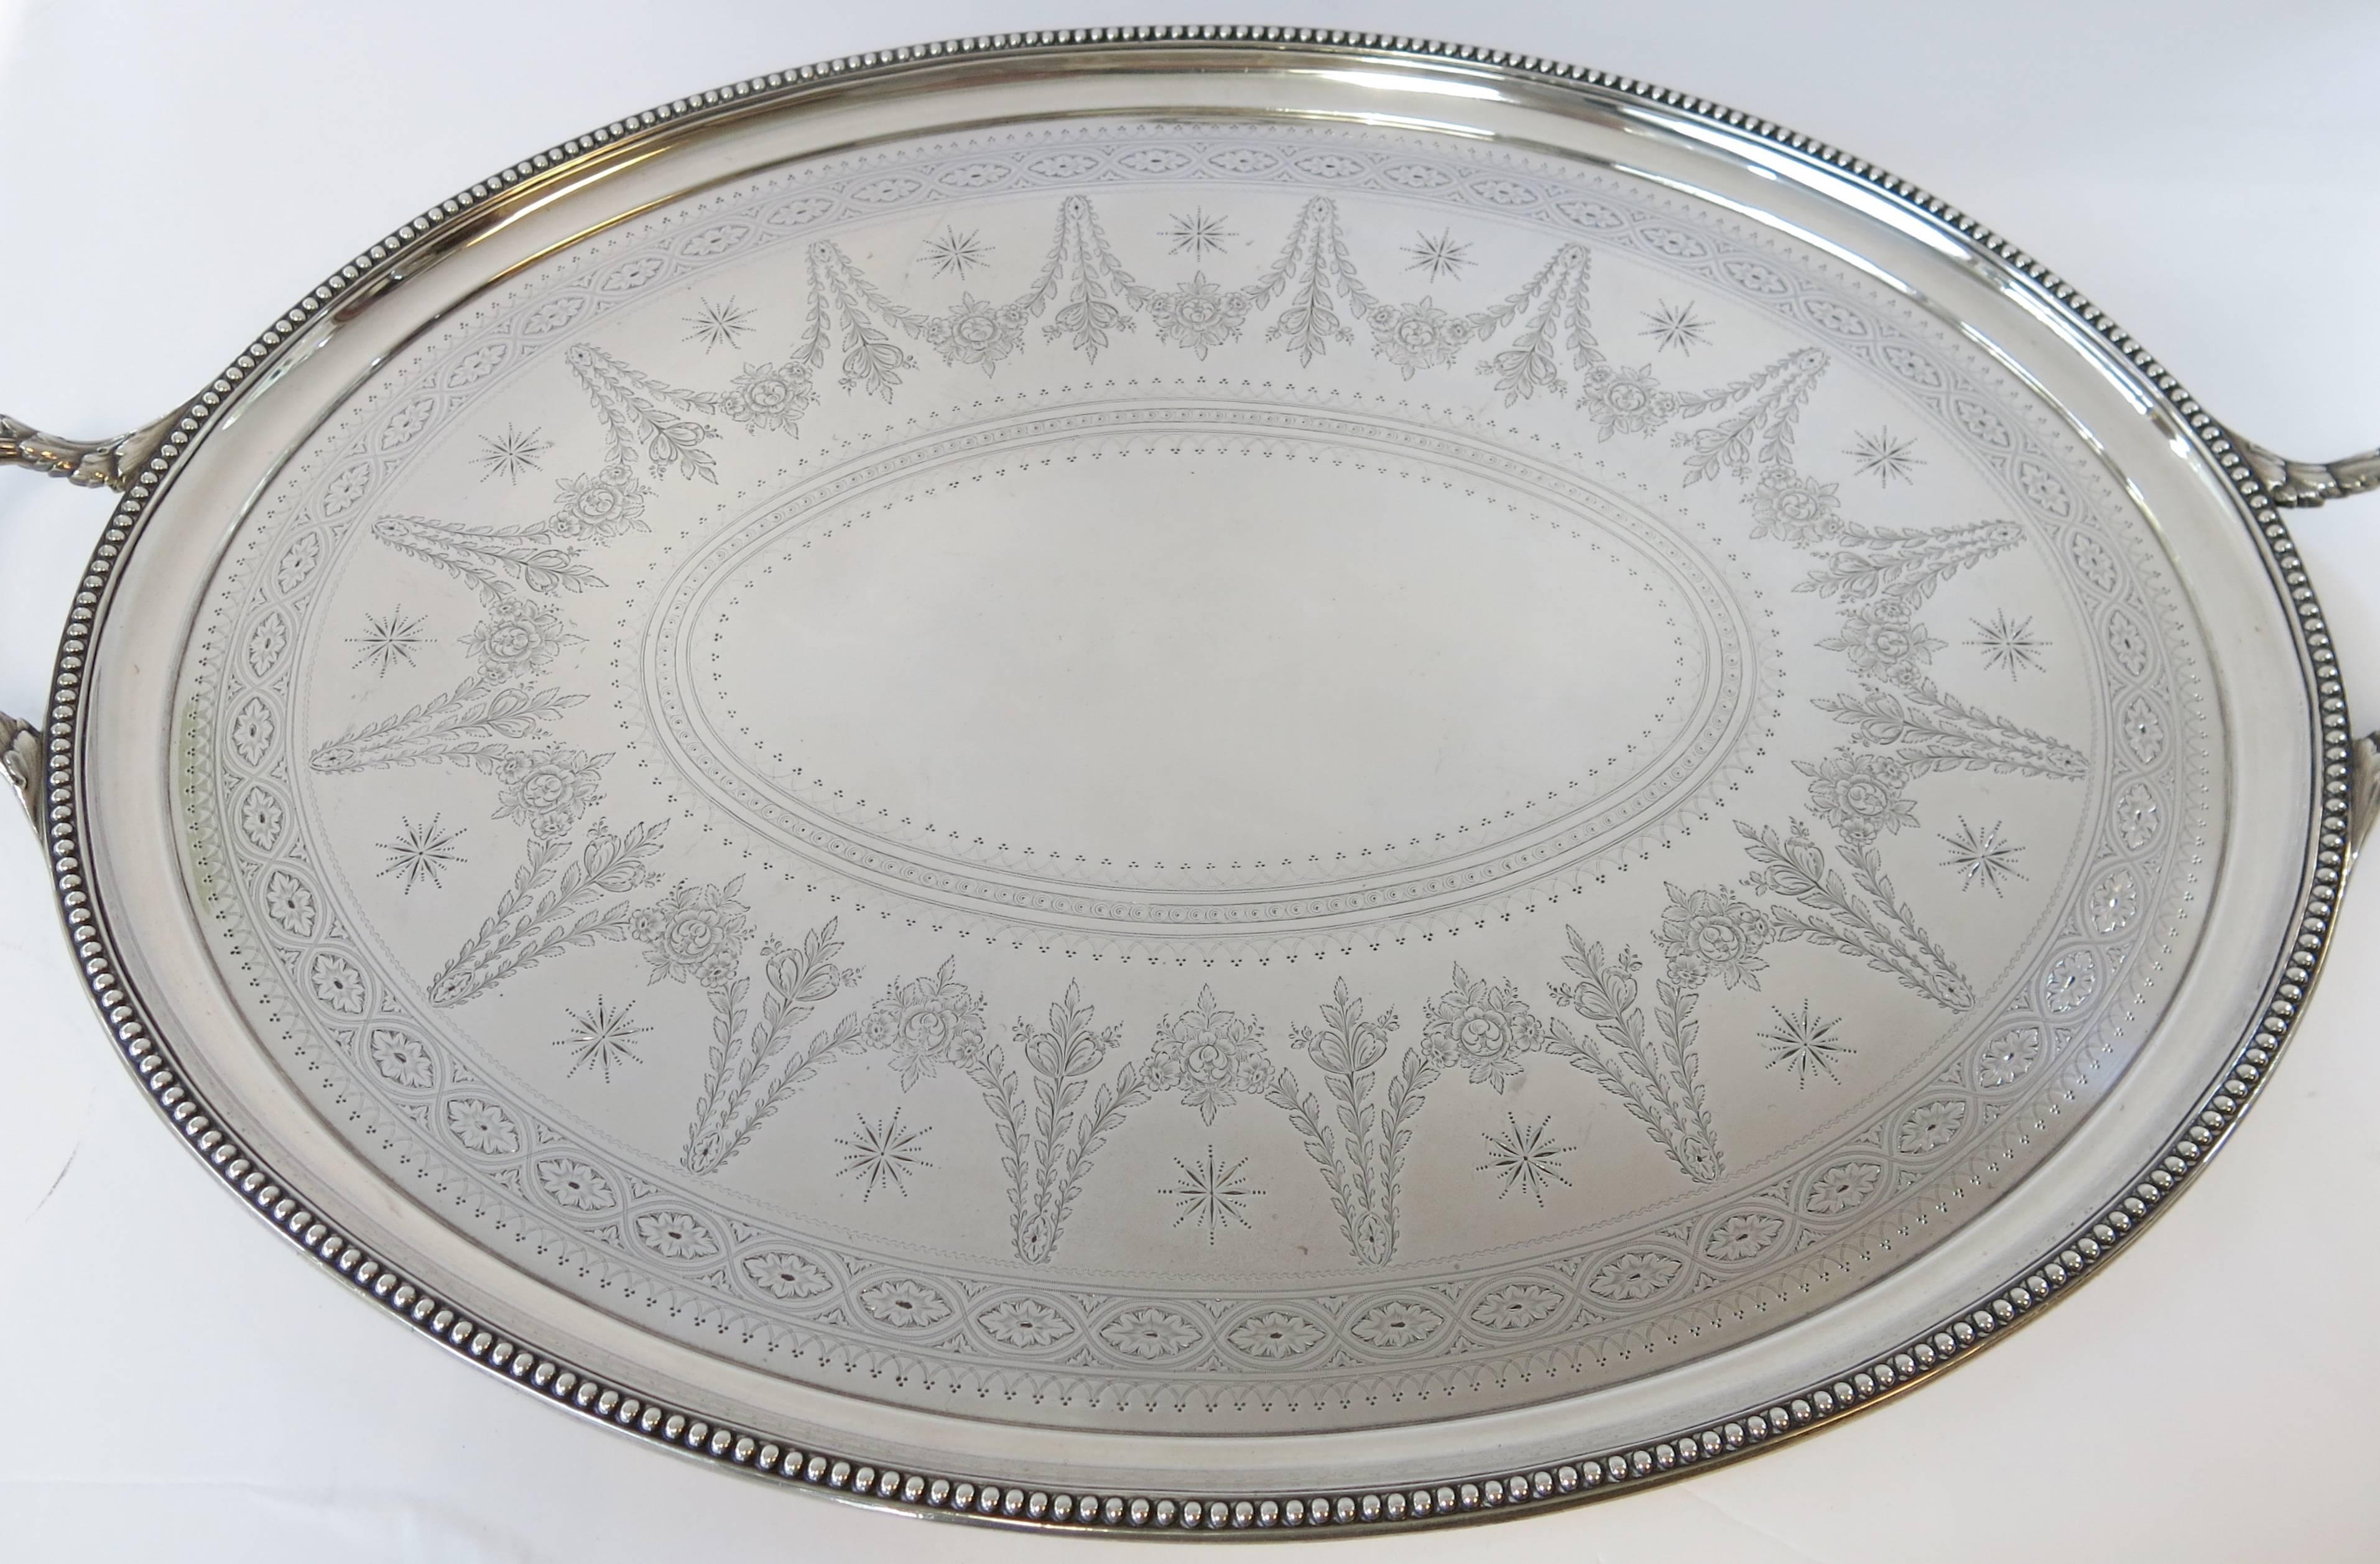 A Fine, Hand Engraved, Oval, 2 Handled Sterling Silver Tray Made By Elkington, Dated 1866. The Tray Has Beautifully Hand Engraved Decoration On Surface Of Tray, With An Applied Bead Border & Reeded Handles. Fully & Correctly Hallmarked On Rear Of